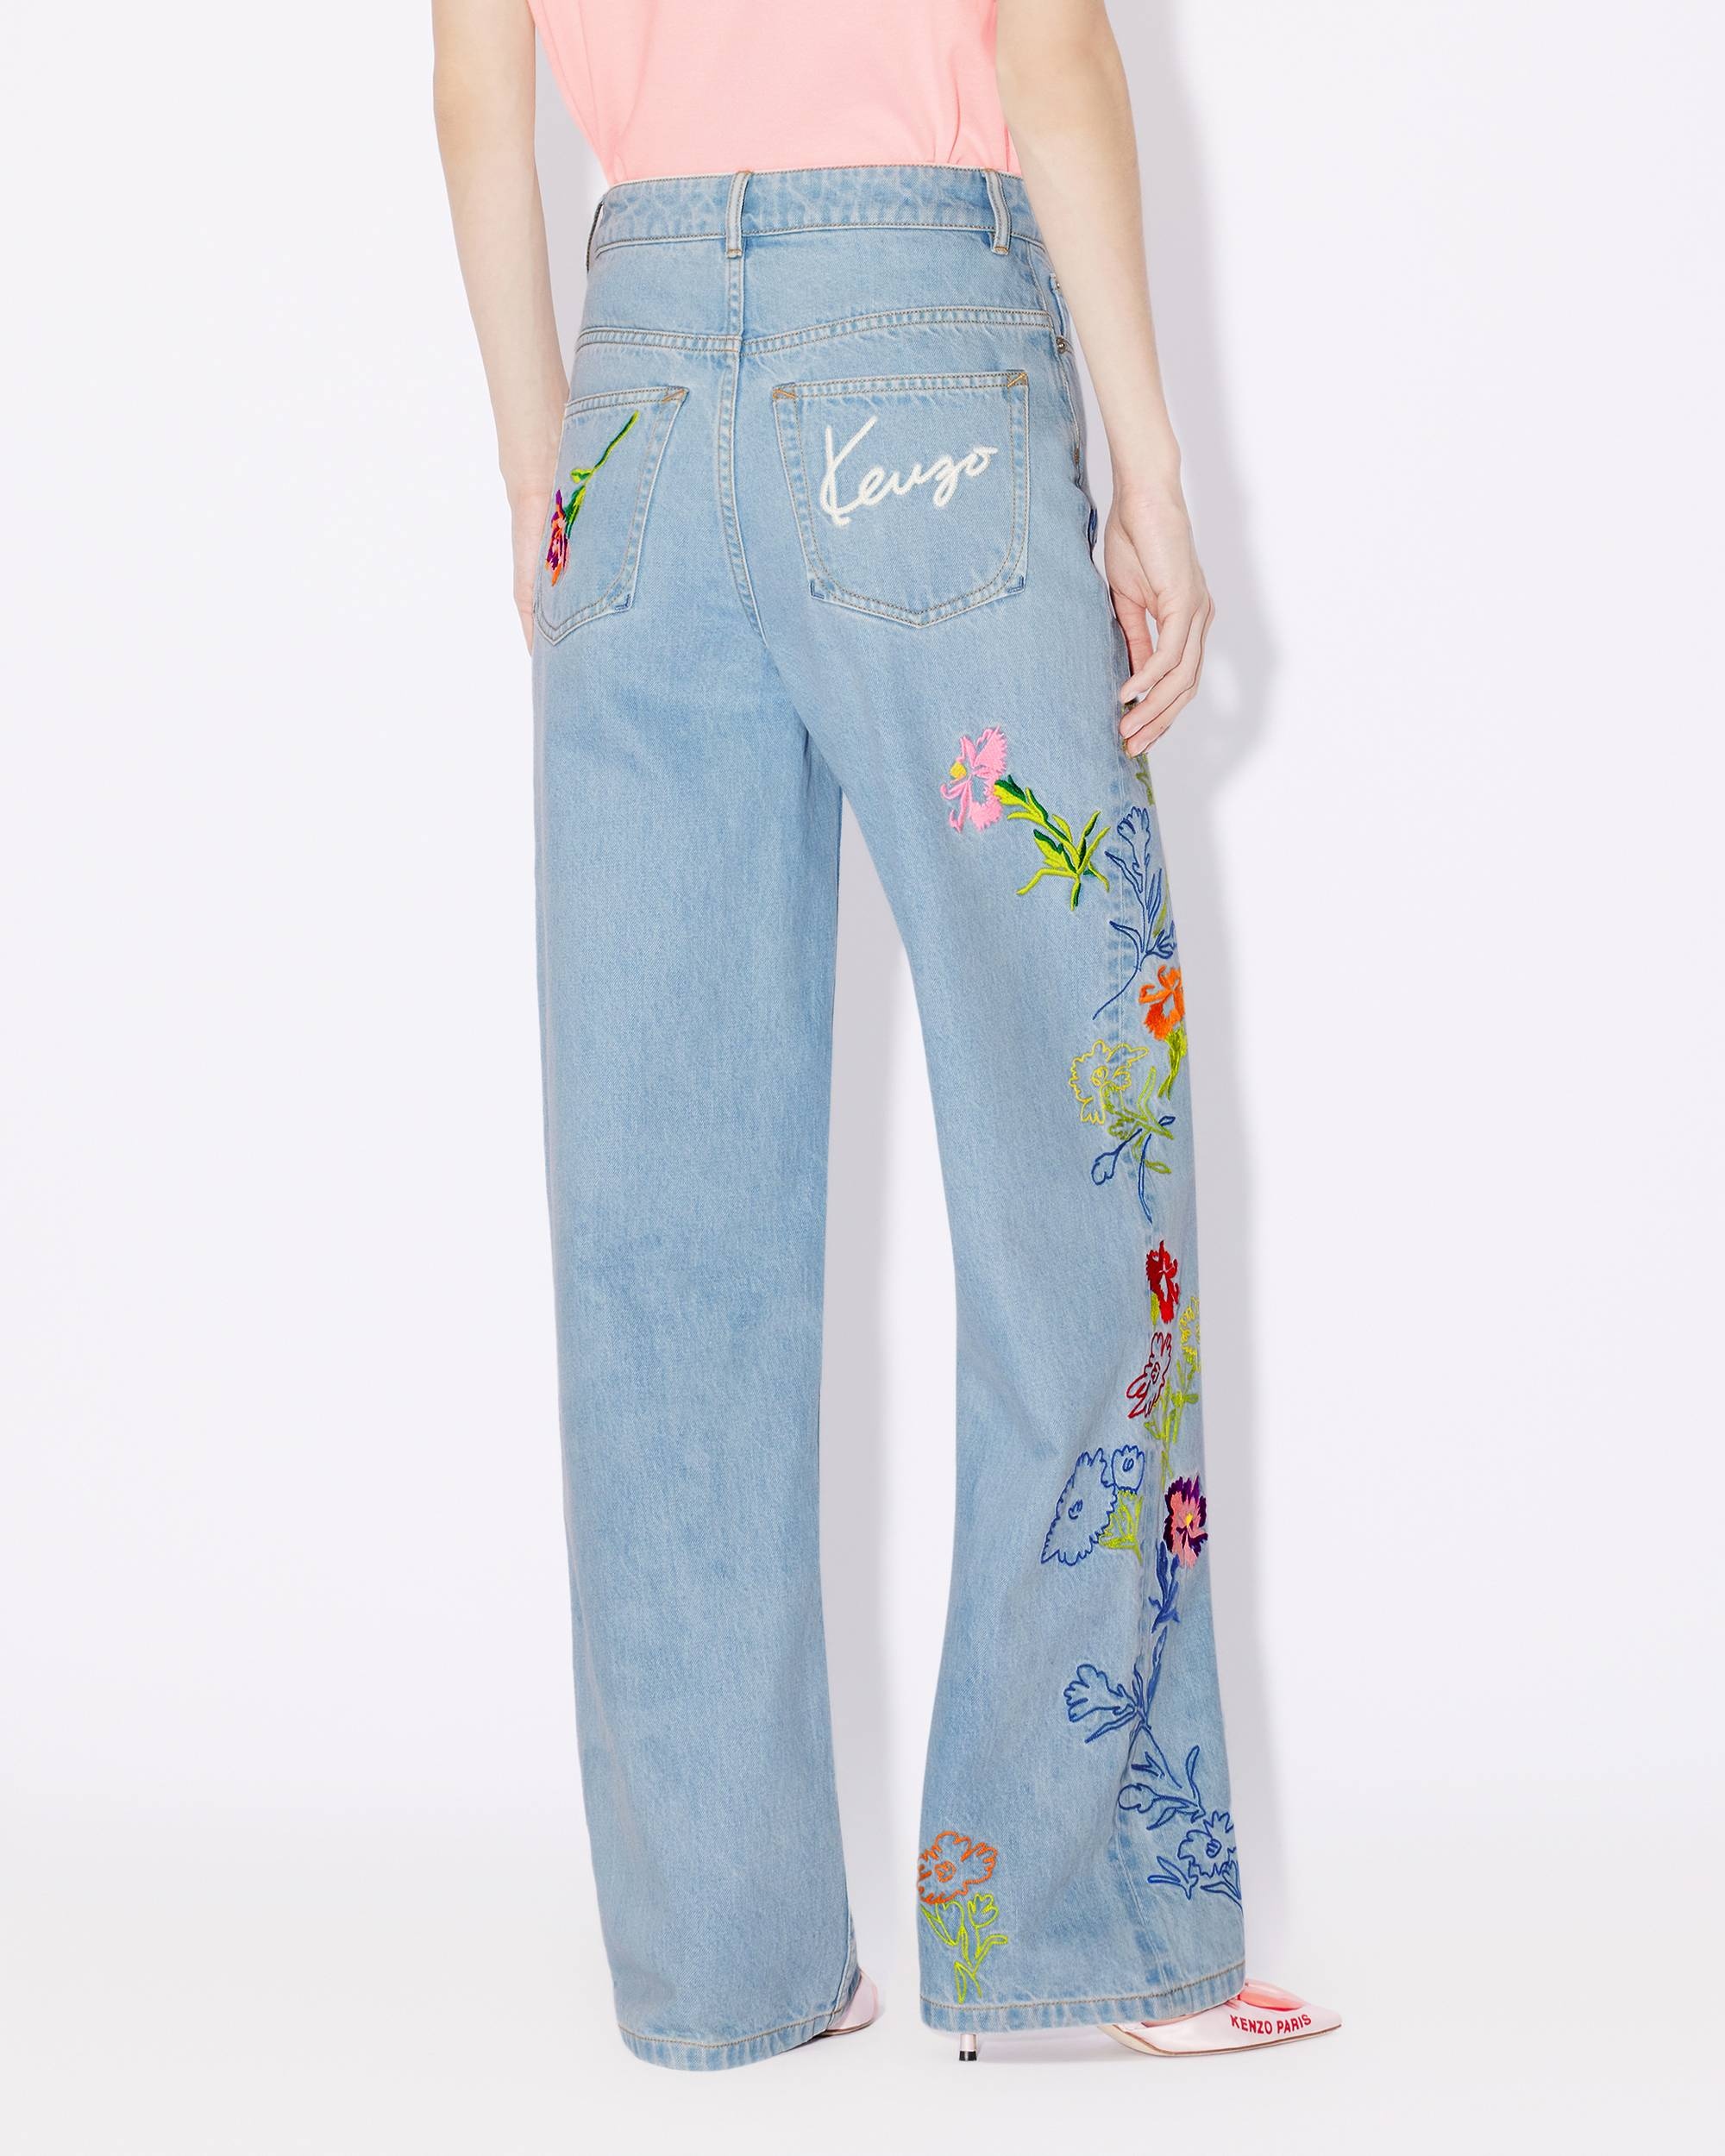 'KENZO Drawn Flowers' AYAME embroidered jeans - 5